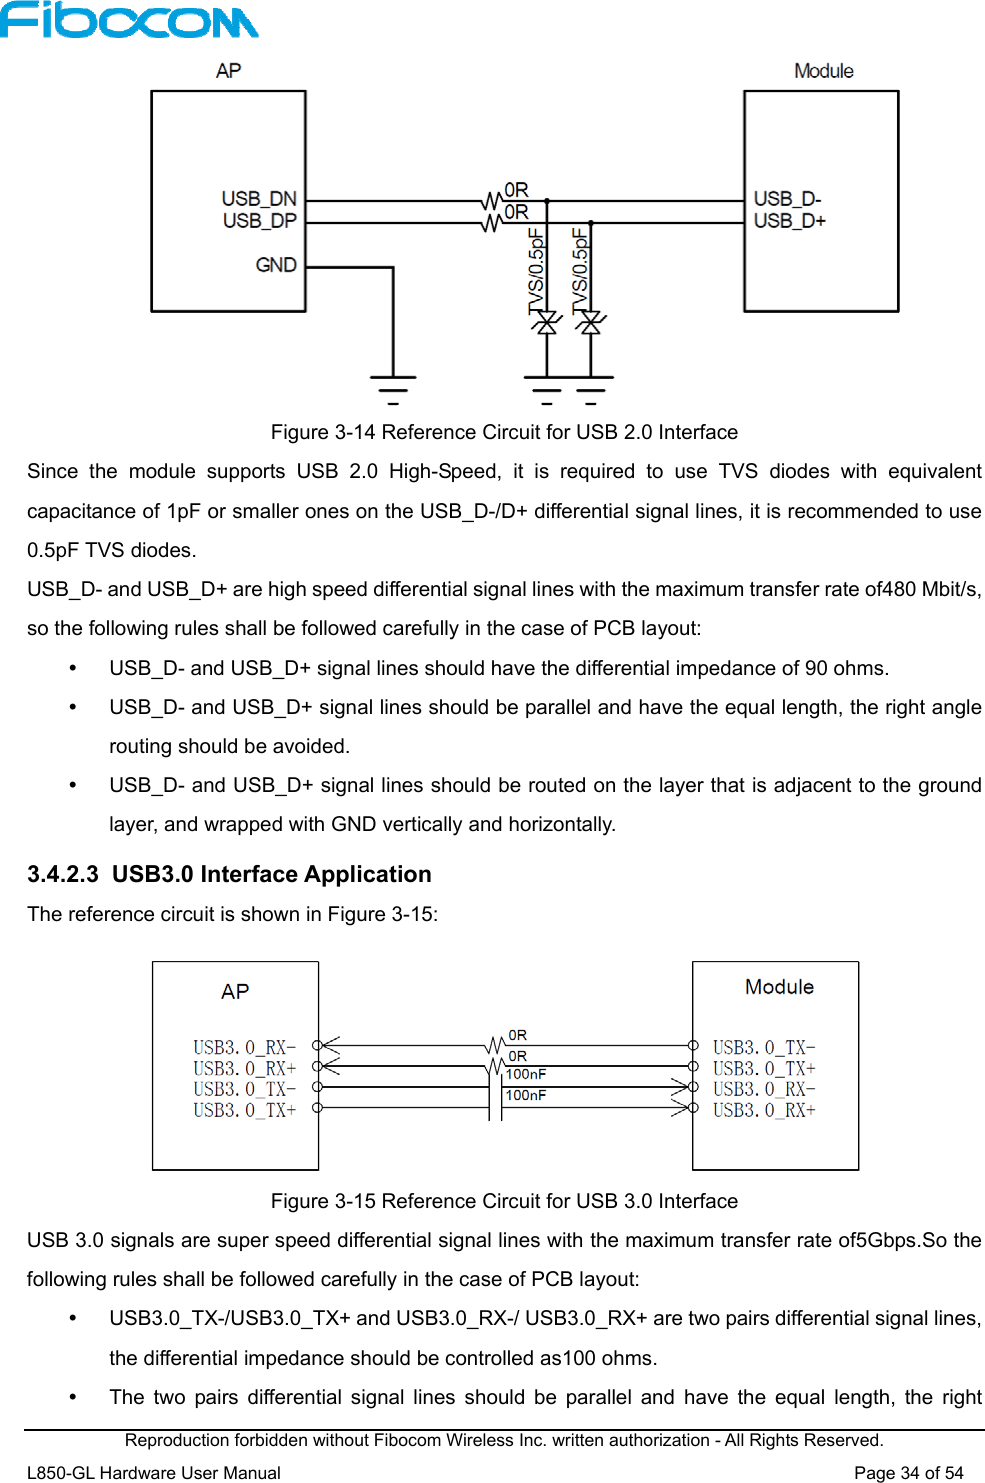  Reproduction forbidden without Fibocom Wireless Inc. written authorization - All Rights Reserved. L850-GL Hardware User Manual                                                                 Page 34 of 54  Figure 3-14 Reference Circuit for USB 2.0 Interface Since  the  module  supports  USB  2.0  High-Speed,  it  is  required  to  use  TVS  diodes  with  equivalent capacitance of 1pF or smaller ones on the USB_D-/D+ differential signal lines, it is recommended to use 0.5pF TVS diodes.   USB_D- and USB_D+ are high speed differential signal lines with the maximum transfer rate of480 Mbit/s, so the following rules shall be followed carefully in the case of PCB layout:     USB_D- and USB_D+ signal lines should have the differential impedance of 90 ohms.   USB_D- and USB_D+ signal lines should be parallel and have the equal length, the right angle routing should be avoided.   USB_D- and USB_D+ signal lines should be routed on the layer that is adjacent to the ground layer, and wrapped with GND vertically and horizontally. 3.4.2.3  USB3.0 Interface Application The reference circuit is shown in Figure 3-15:     Figure 3-15 Reference Circuit for USB 3.0 Interface   USB 3.0 signals are super speed differential signal lines with the maximum transfer rate of5Gbps.So the following rules shall be followed carefully in the case of PCB layout:     USB3.0_TX-/USB3.0_TX+ and USB3.0_RX-/ USB3.0_RX+ are two pairs differential signal lines, the differential impedance should be controlled as100 ohms.   The  two  pairs  differential signal  lines  should be  parallel  and  have the  equal length, the  right 